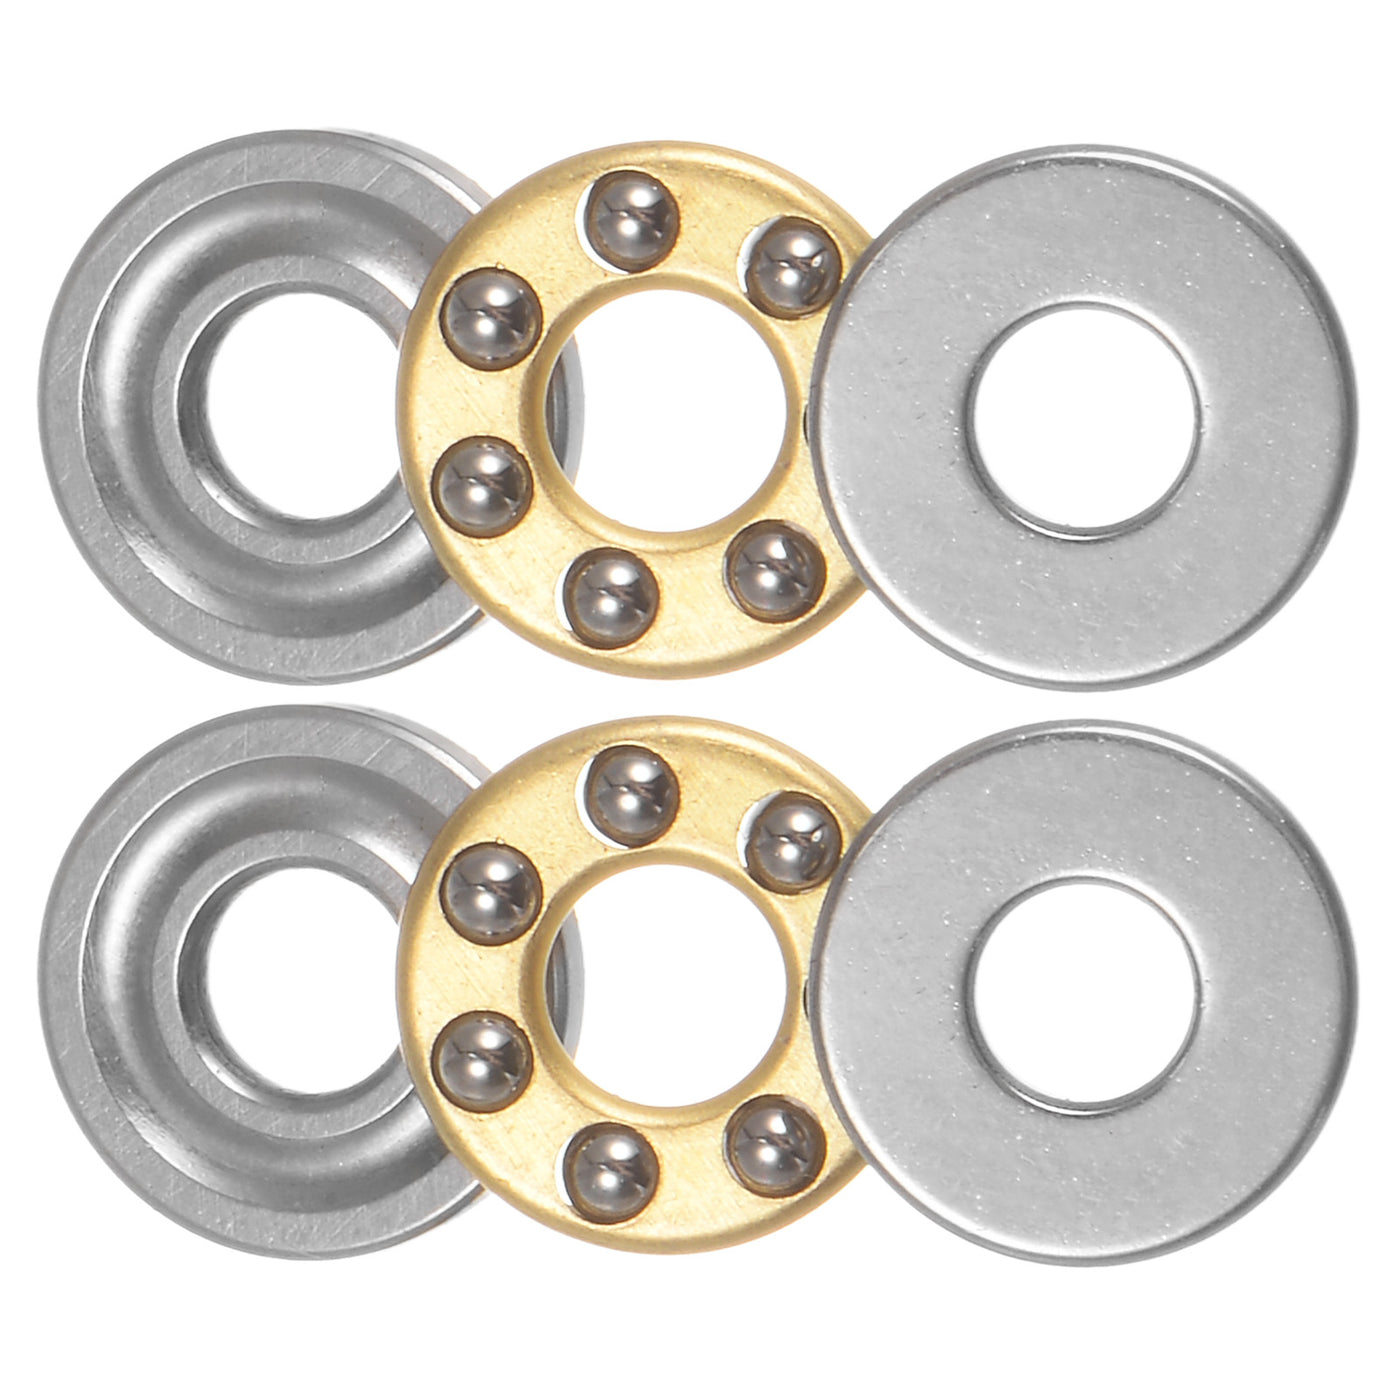 uxcell Uxcell F3-8M Thrust Ball Bearing 3x8x3.5mm Brass with Washers ABEC3 2pcs